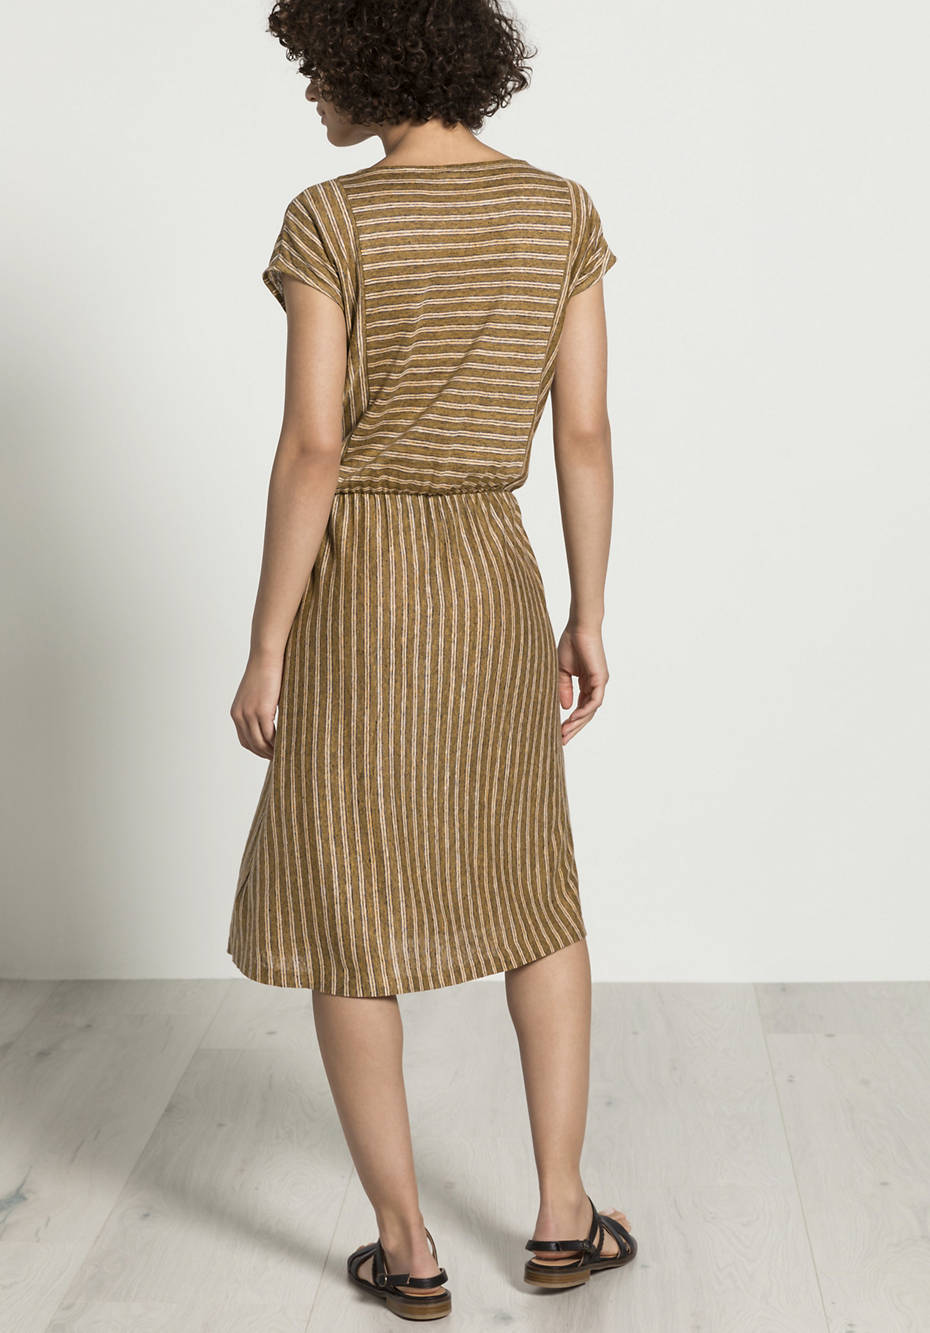 Striped dress made of pure linen